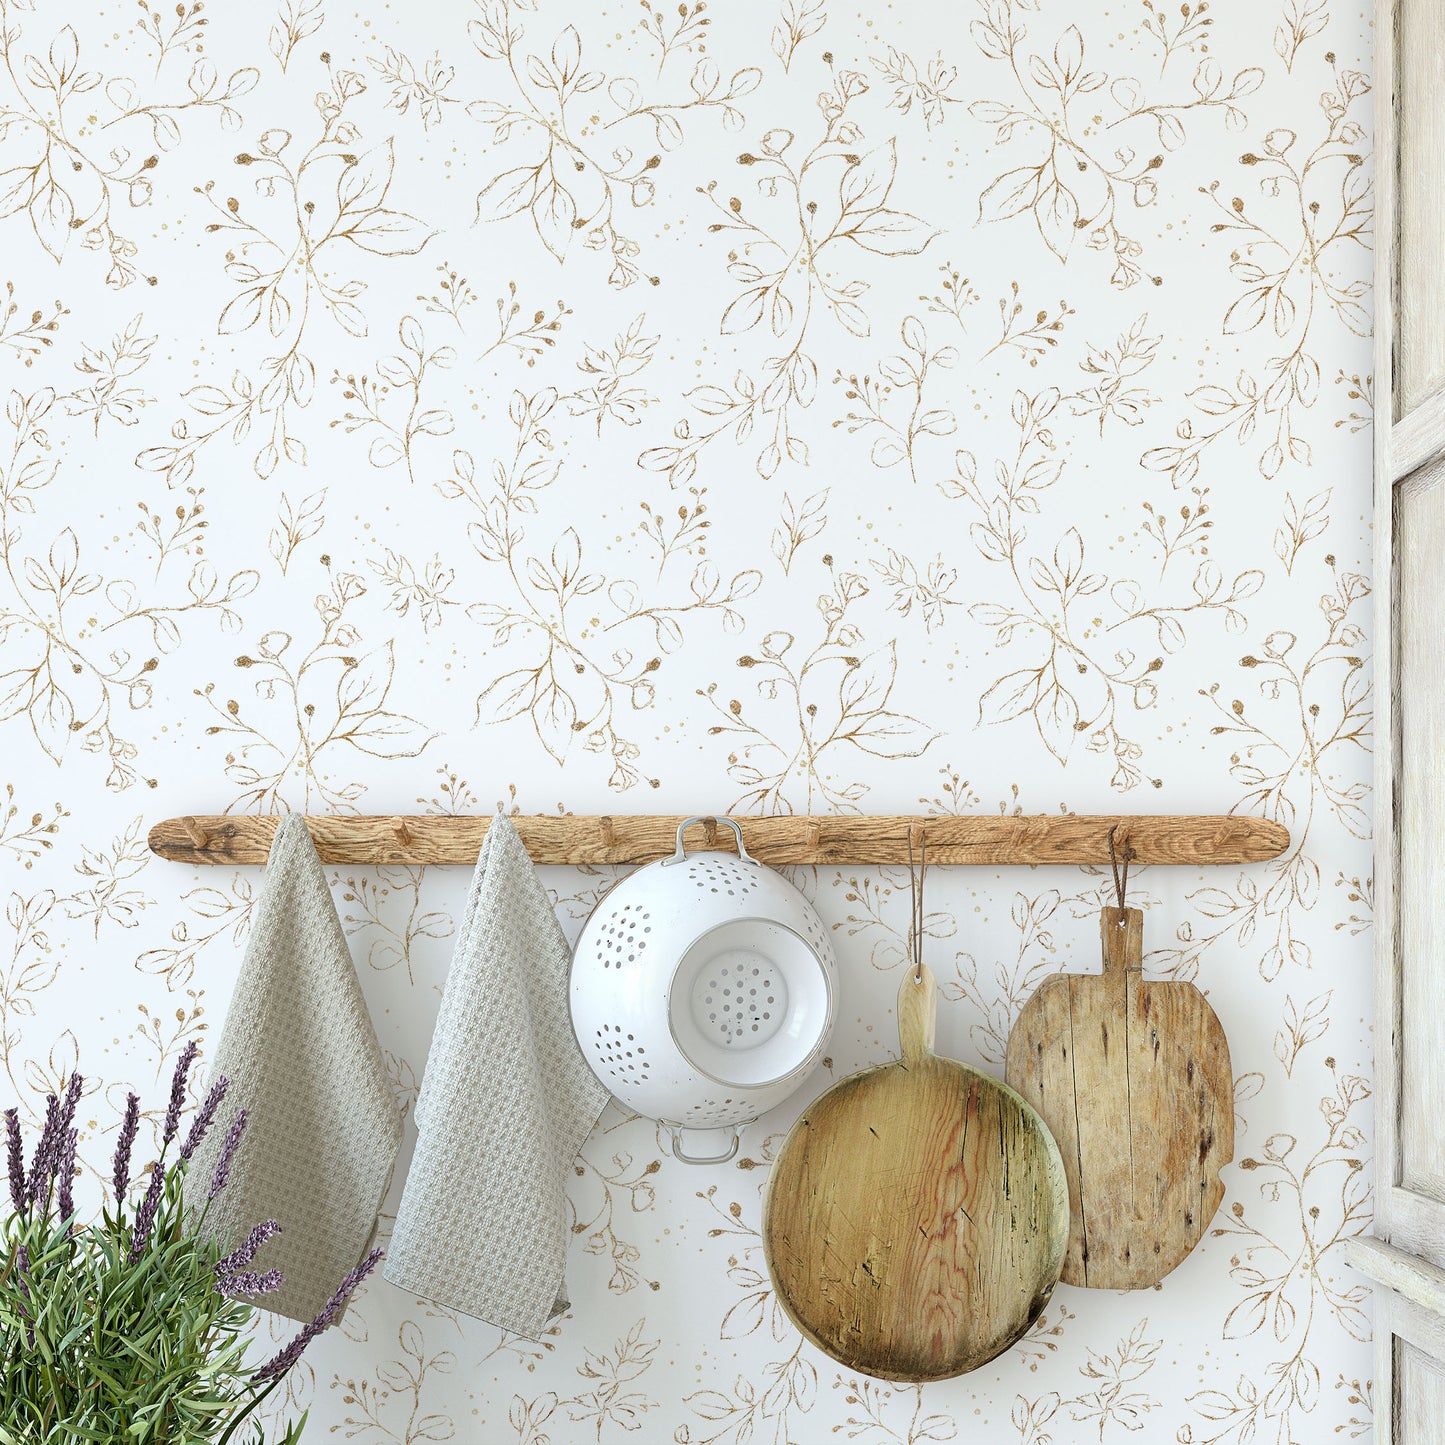 Delicate gold floral/foliage print on cream background easy to install and remove peel and stick custom wallpaper available in different lengths/sizes locally created and printed in Canada. Removable, washable, durable, commercial grade, customizable and water proof.